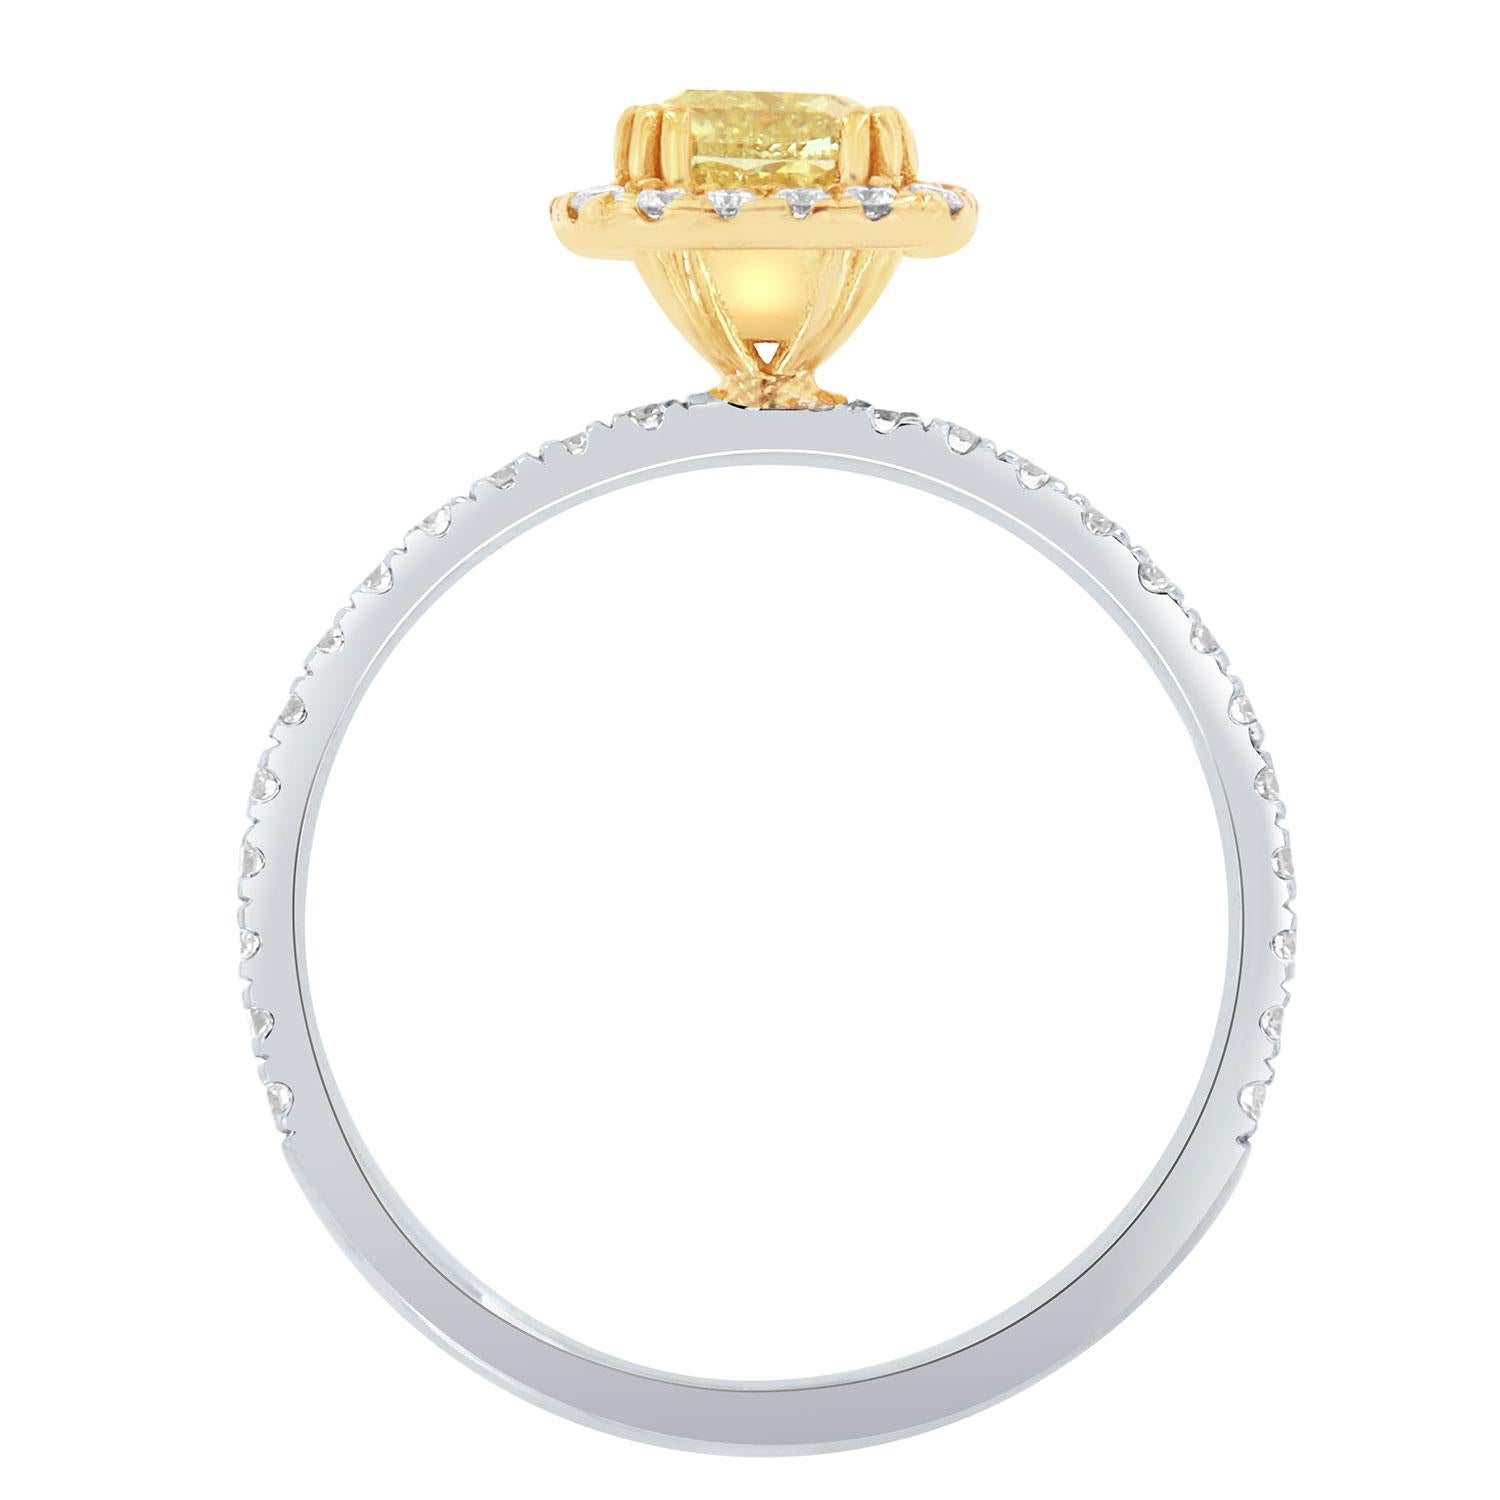 EGL USA 0.83 Carat Cushion Yellow 18K White & Yellow Gold Halo Diamond Ring In New Condition For Sale In San Francisco, CA